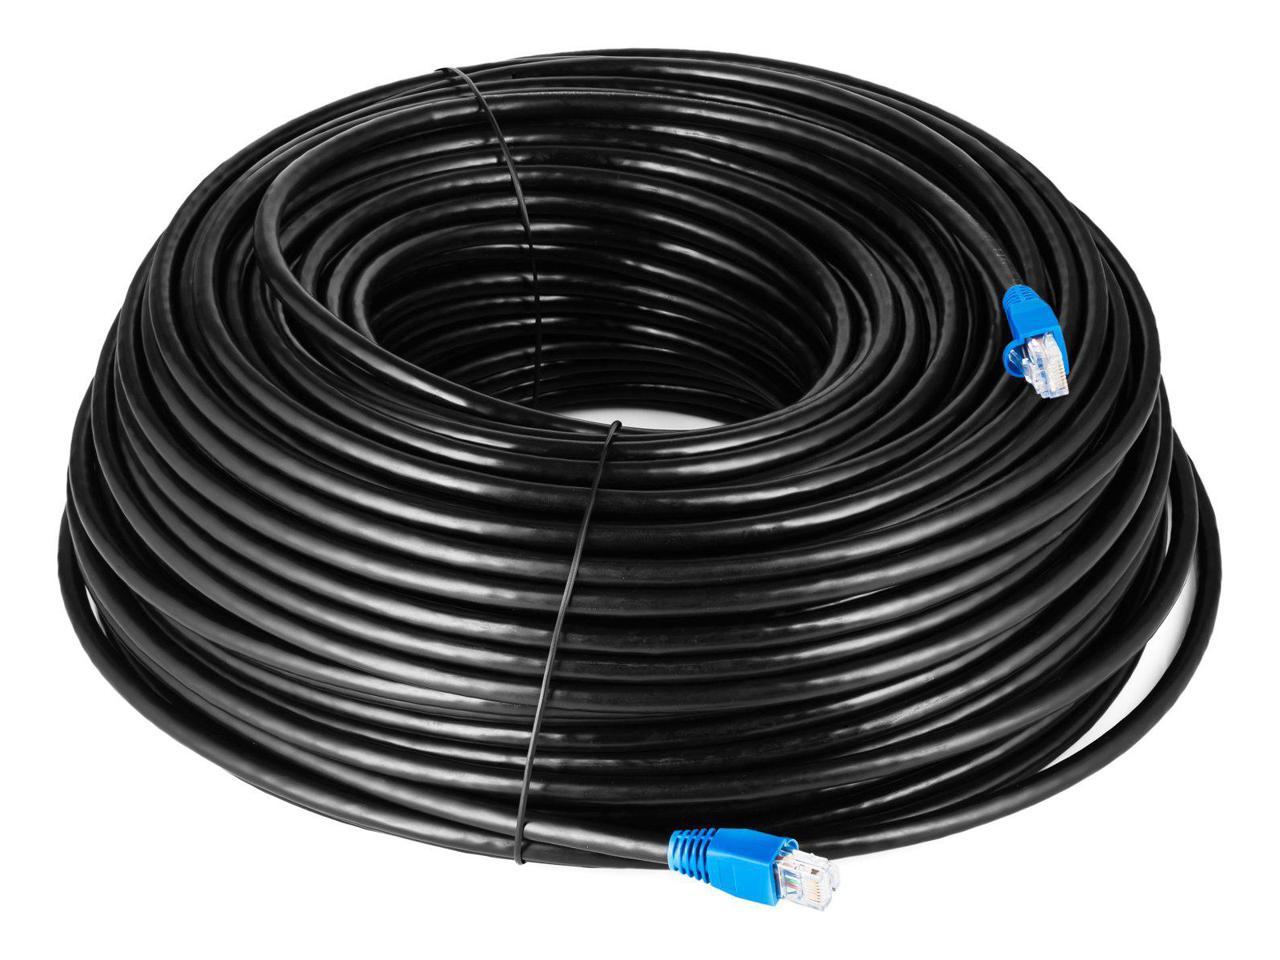 Zero Lag Pure Copper 550Mhz Maximm Cat6 Outdoor Cable 75ft – Black Waterproof Ethernet Cable Suitable for Direct Burial Installations. 